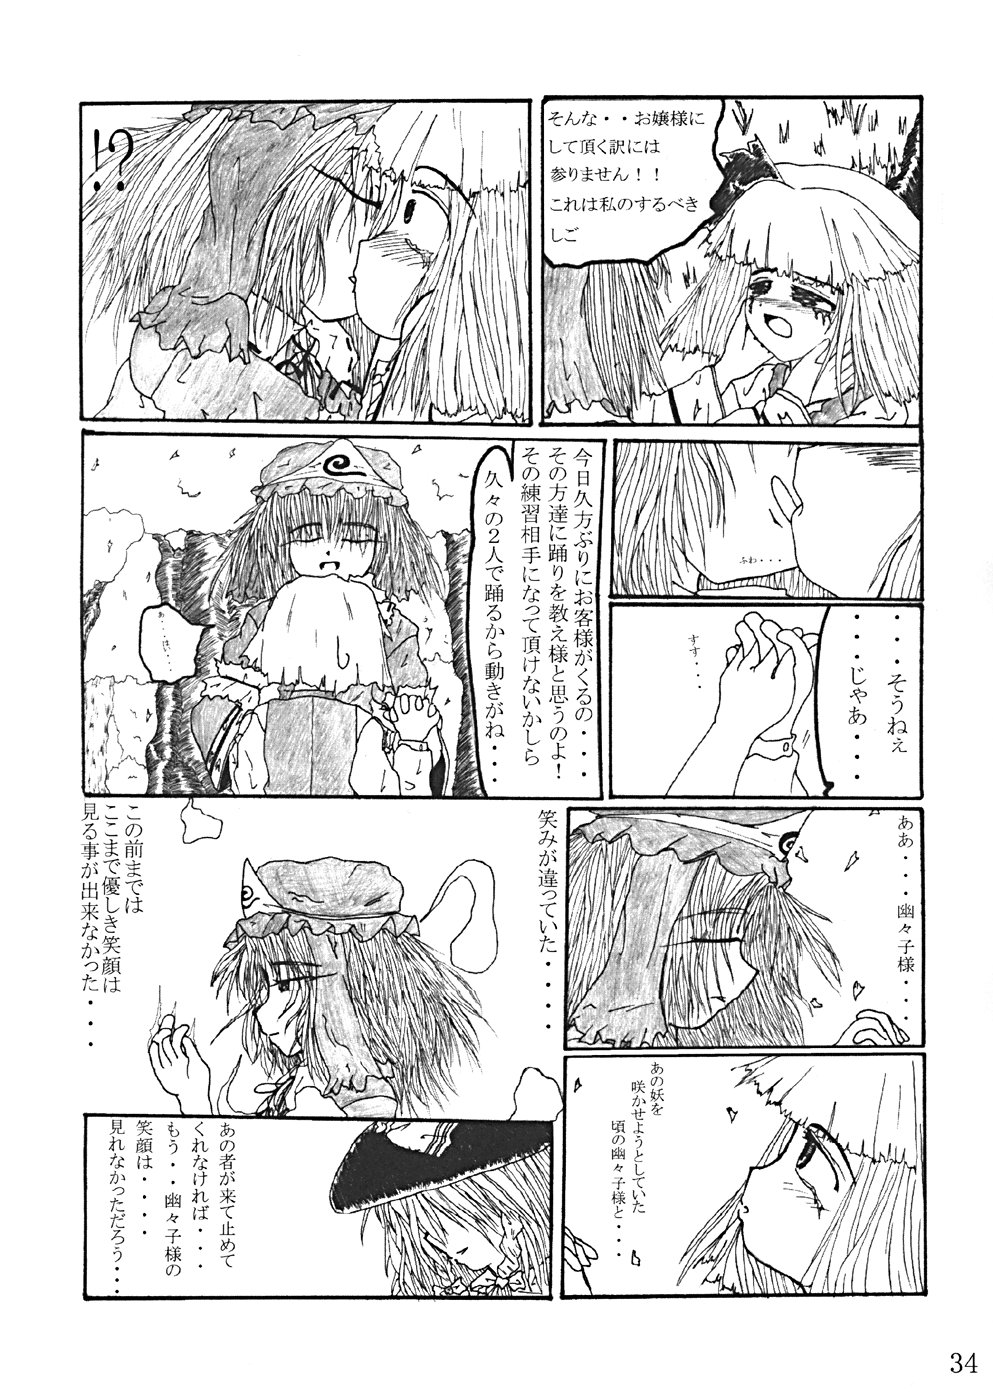 (CR35) [LemonMaiden (Various)] Oukasai ～ Cherry Point MAX (Touhou Project) page 37 full